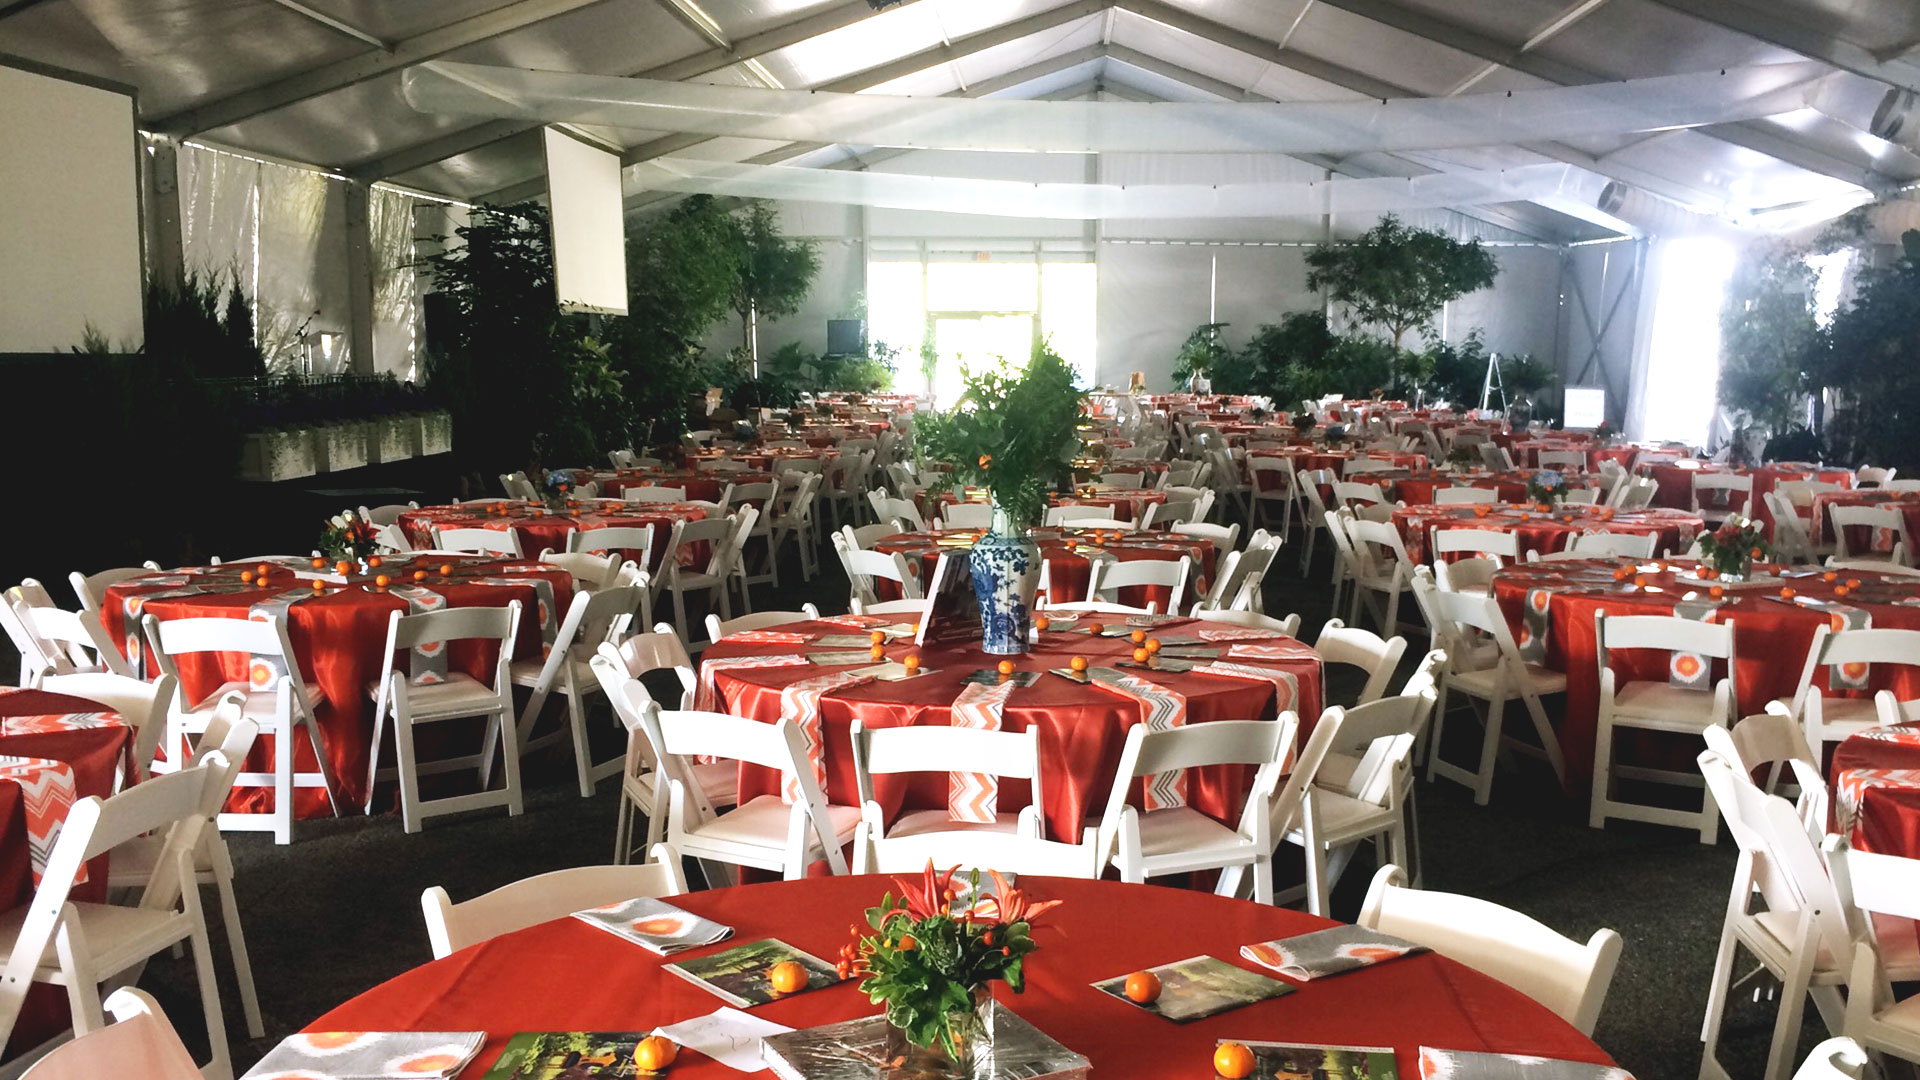 Corporate event with orange linens on round tables with white resin chairs